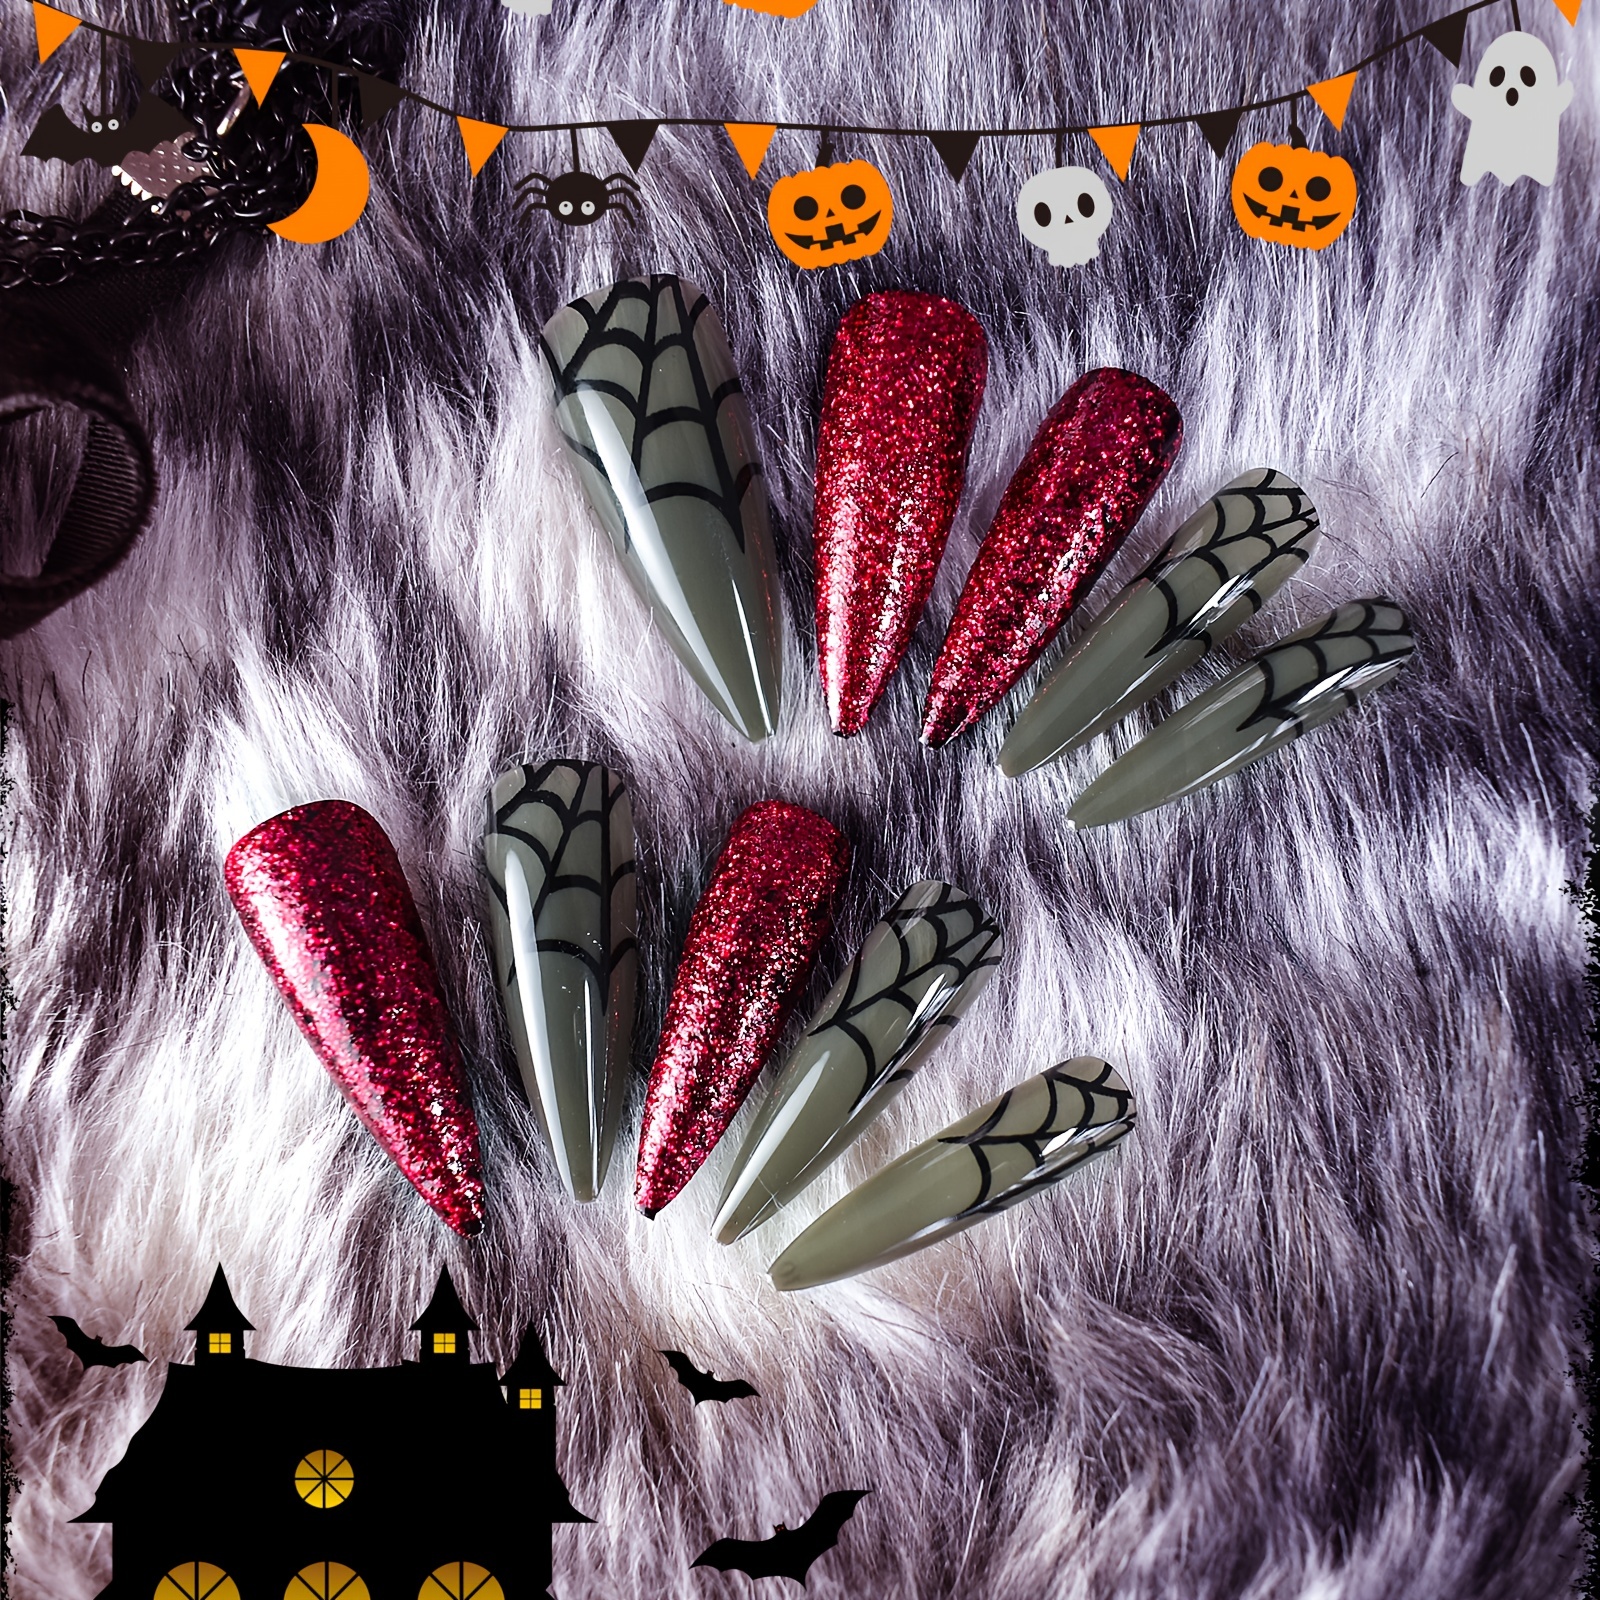 Halloween Press on Nails Long Stiletto Purple Fake Nails Goth Nail Charms  Full Cover RICFDD False Nails with Spider Web Designs Glossy Glue on Nails